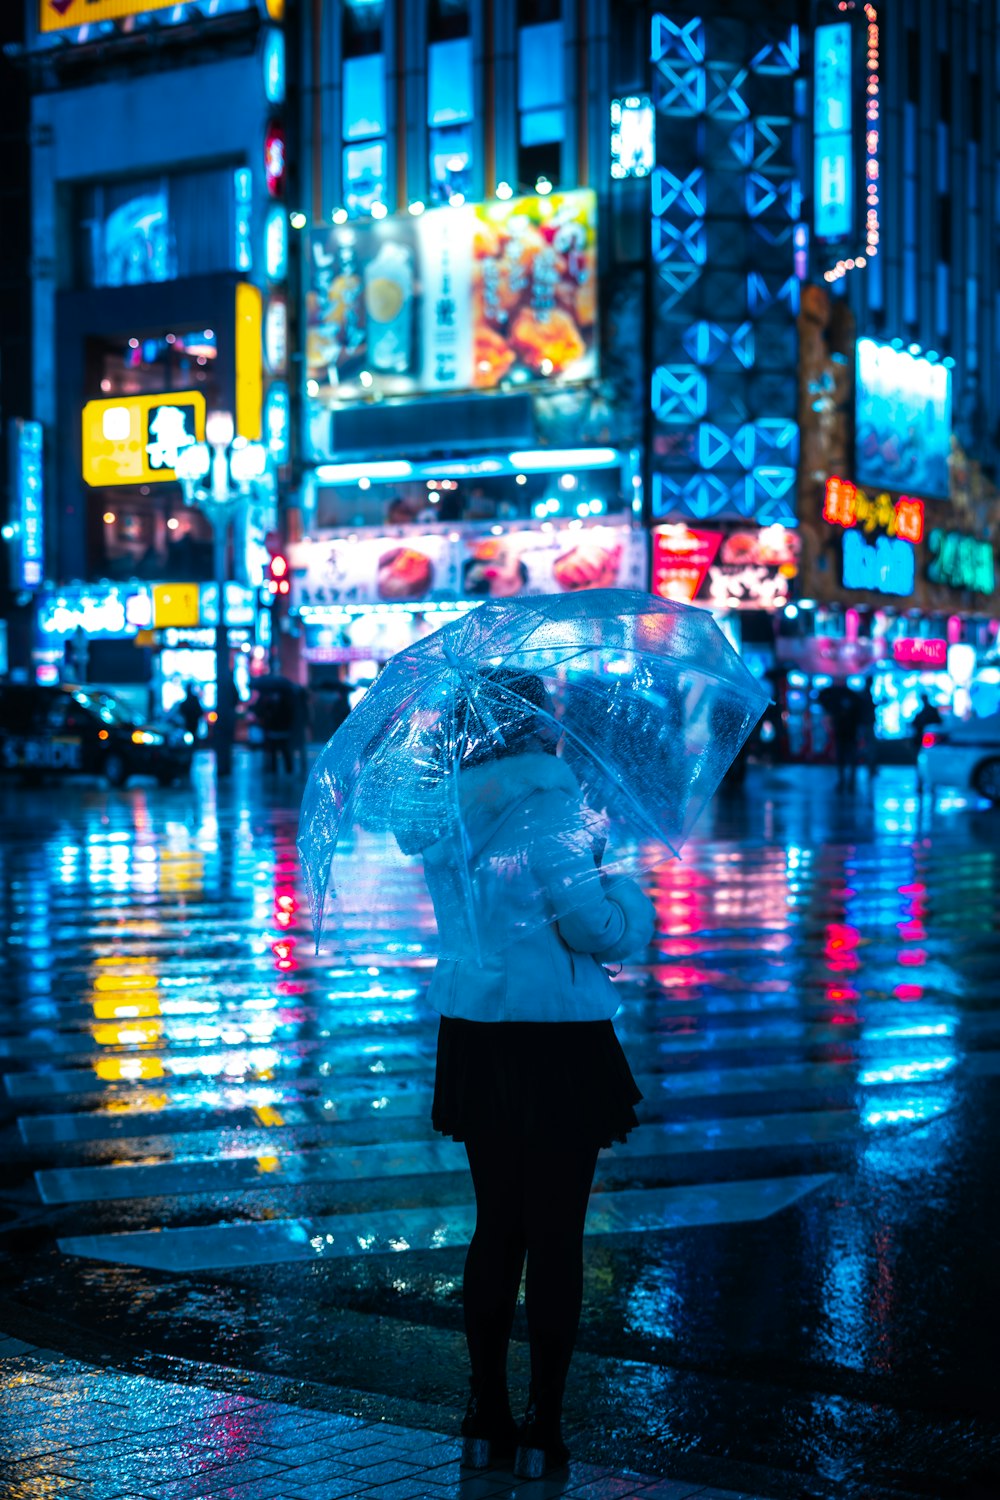 a woman holding an umbrella on a city street at night